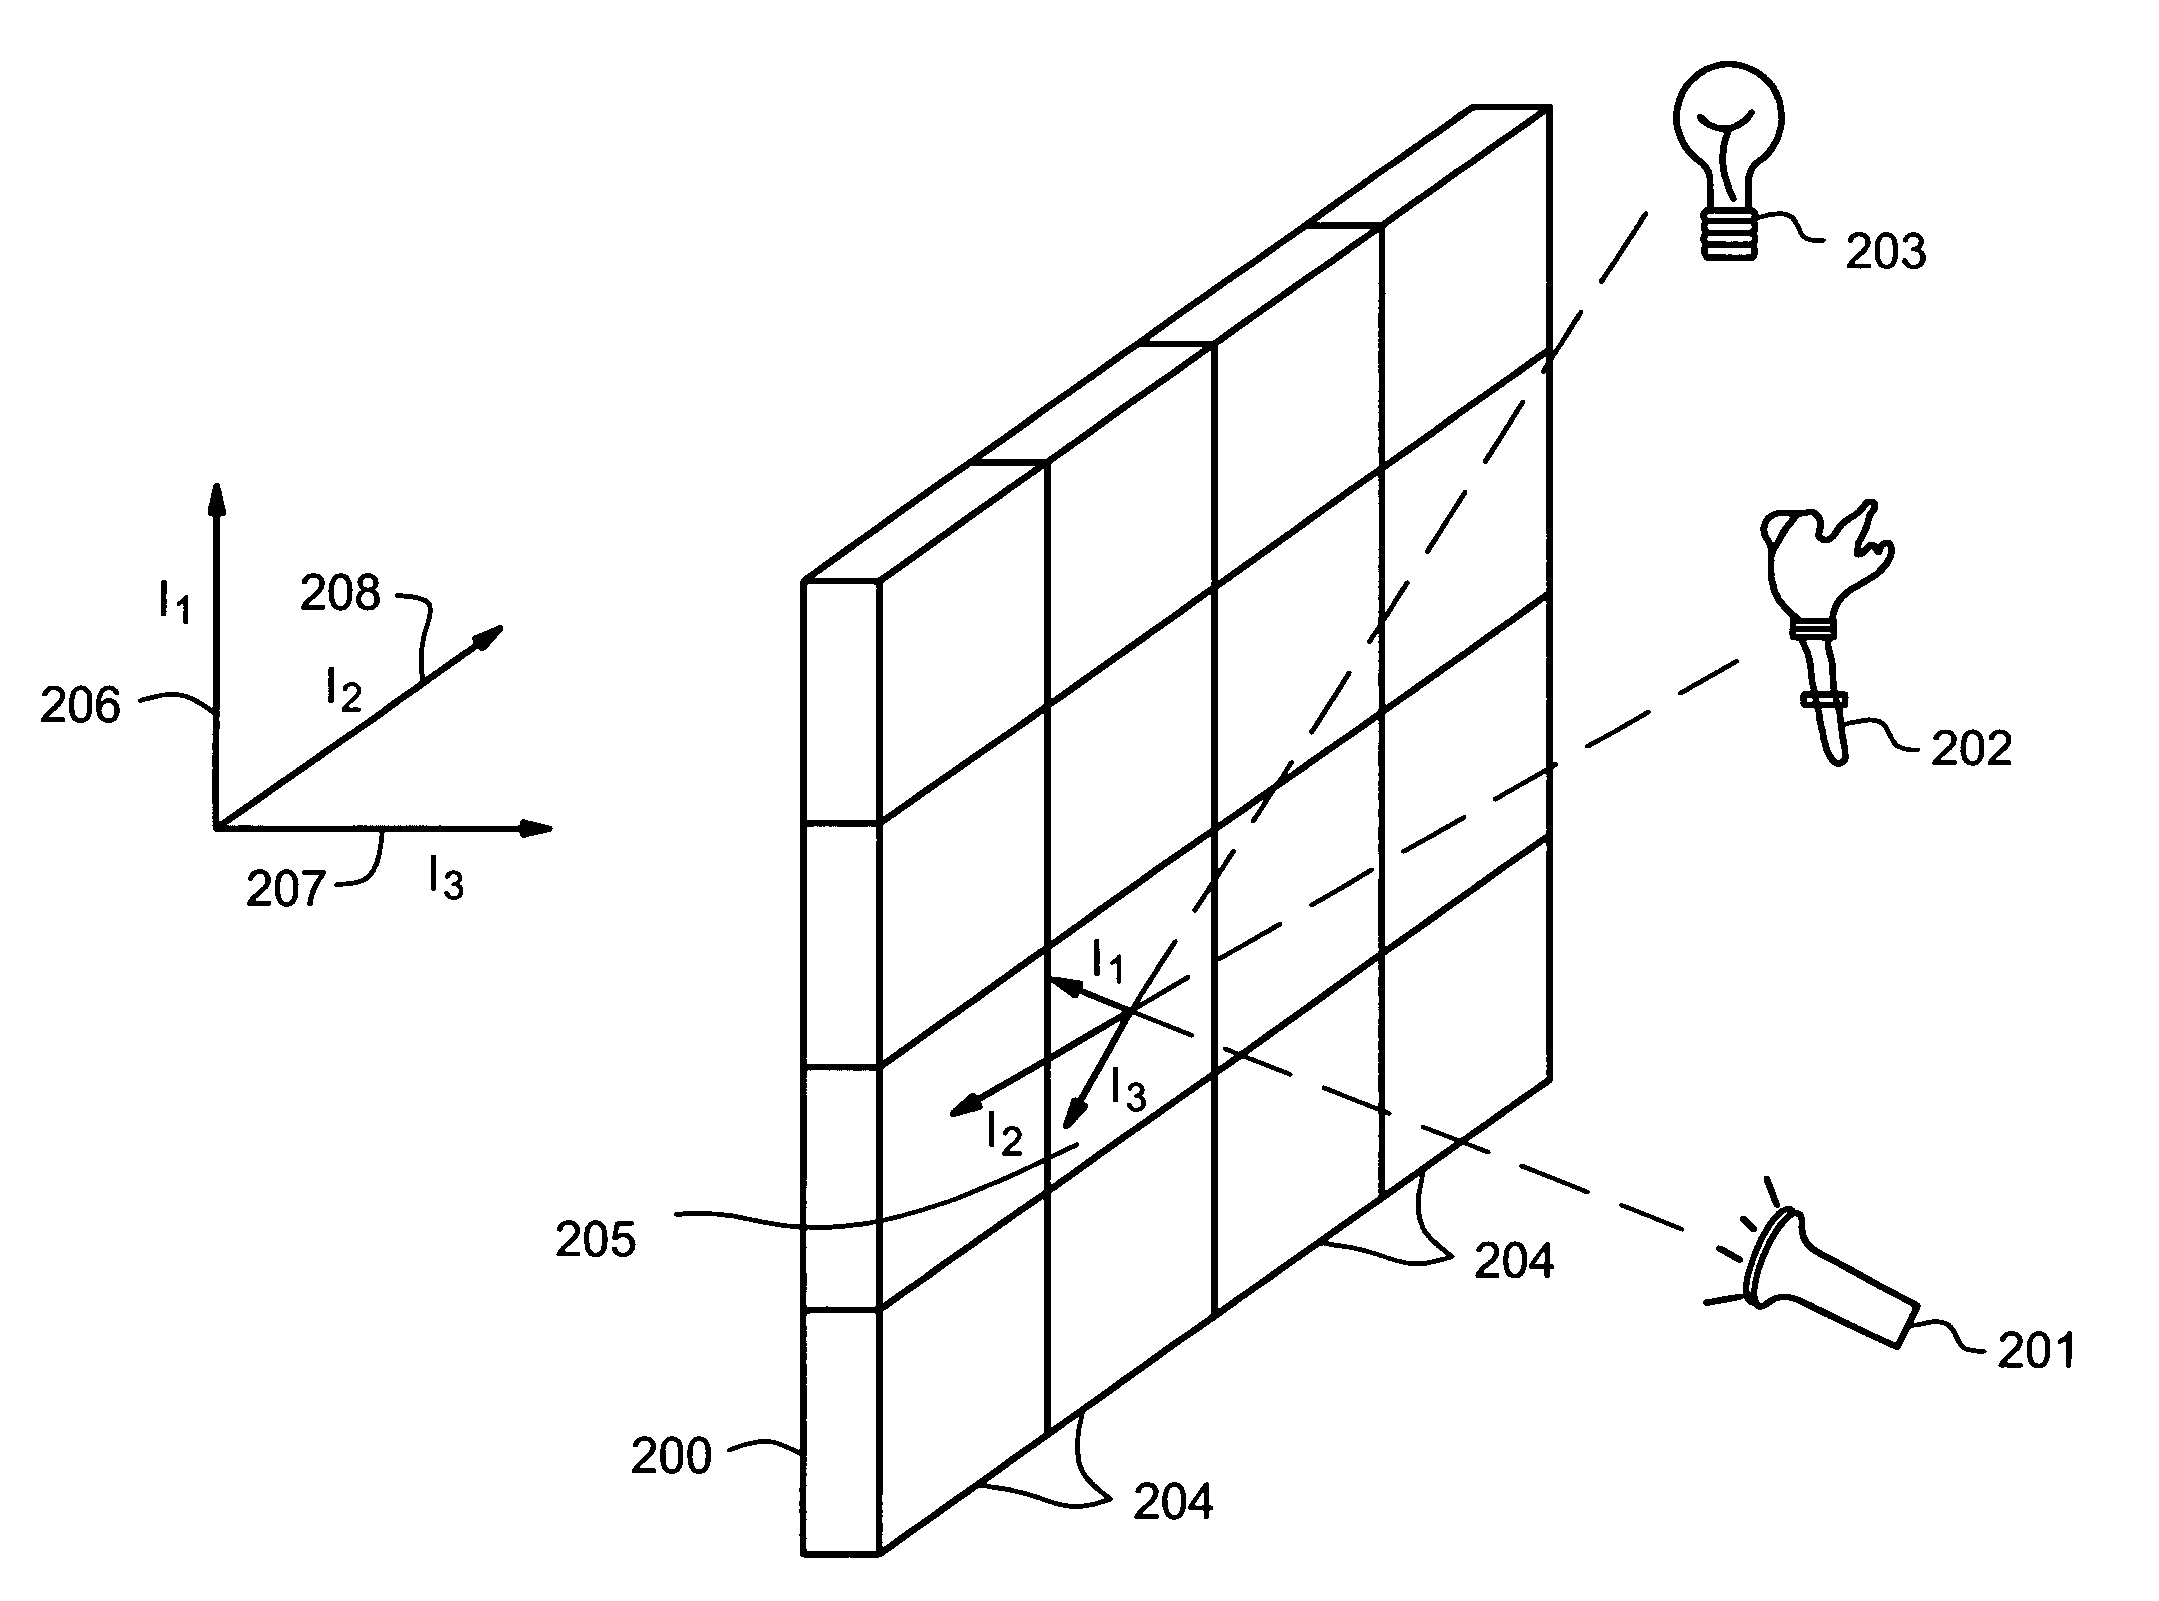 System and method for displaying the effects of light illumination on a surface